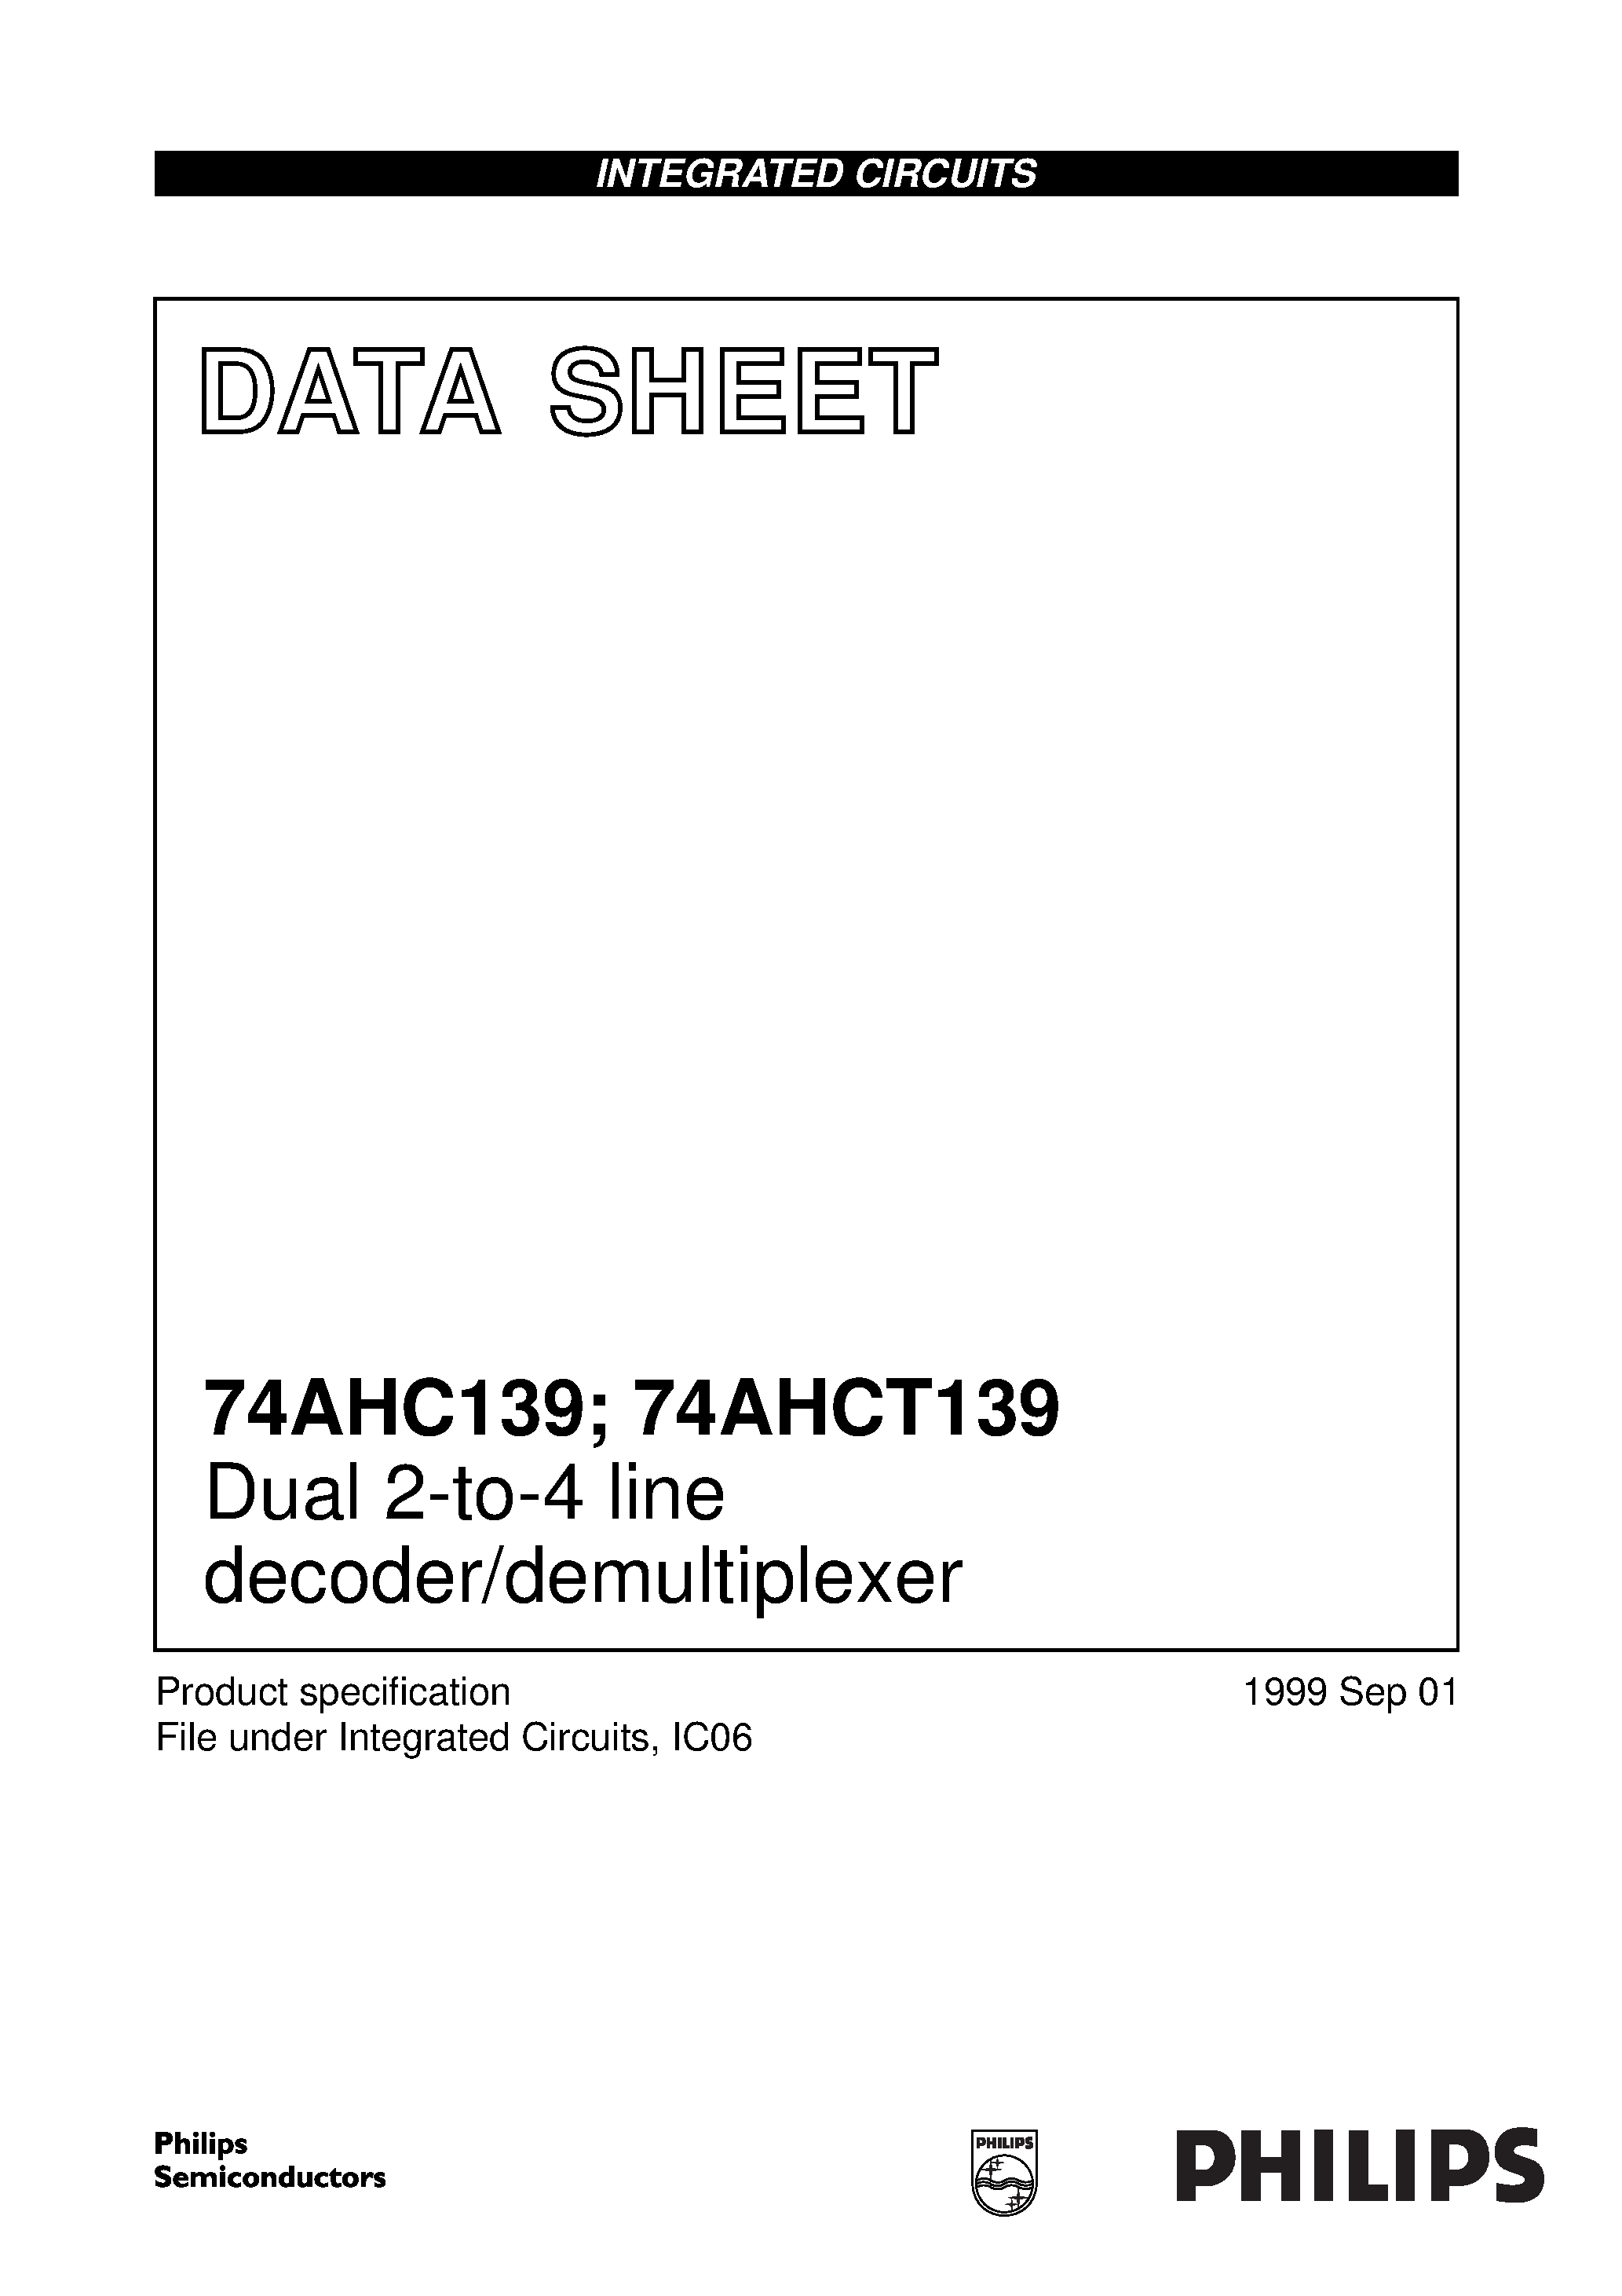 Datasheet 74AHC139 - Dual 2-to-4 line decoder/demultiplexer page 1